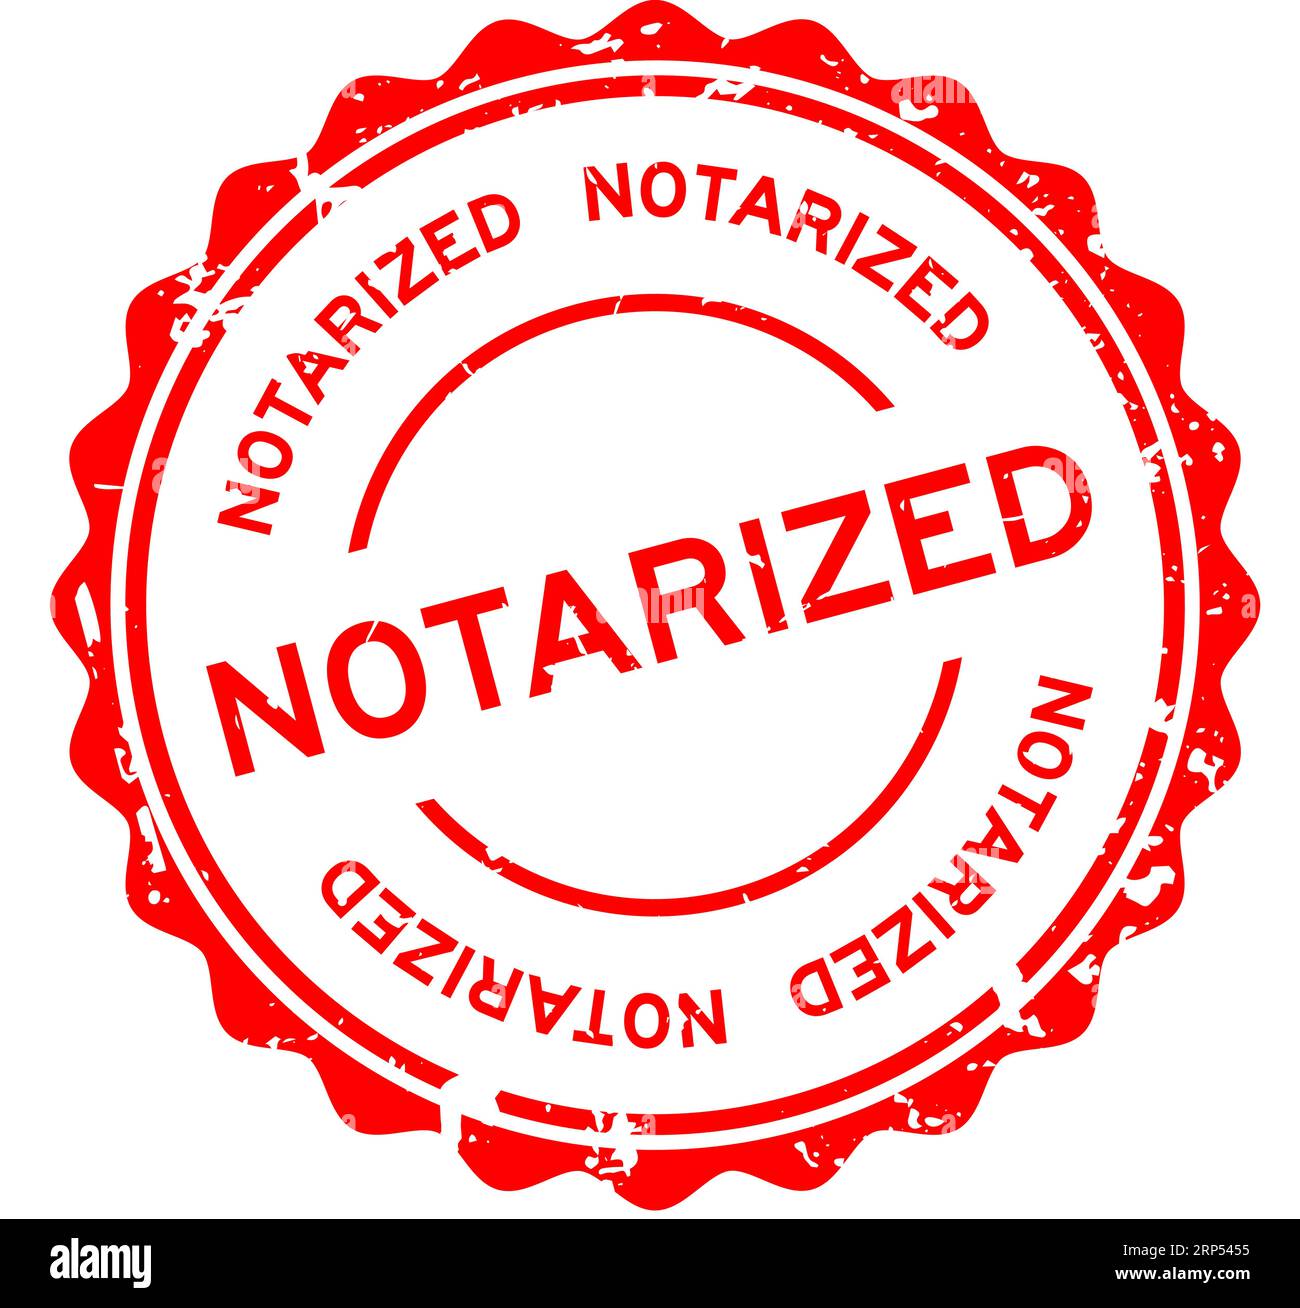 Grunge Red Notarized Word Round Rubber Seal Stamp On White Background